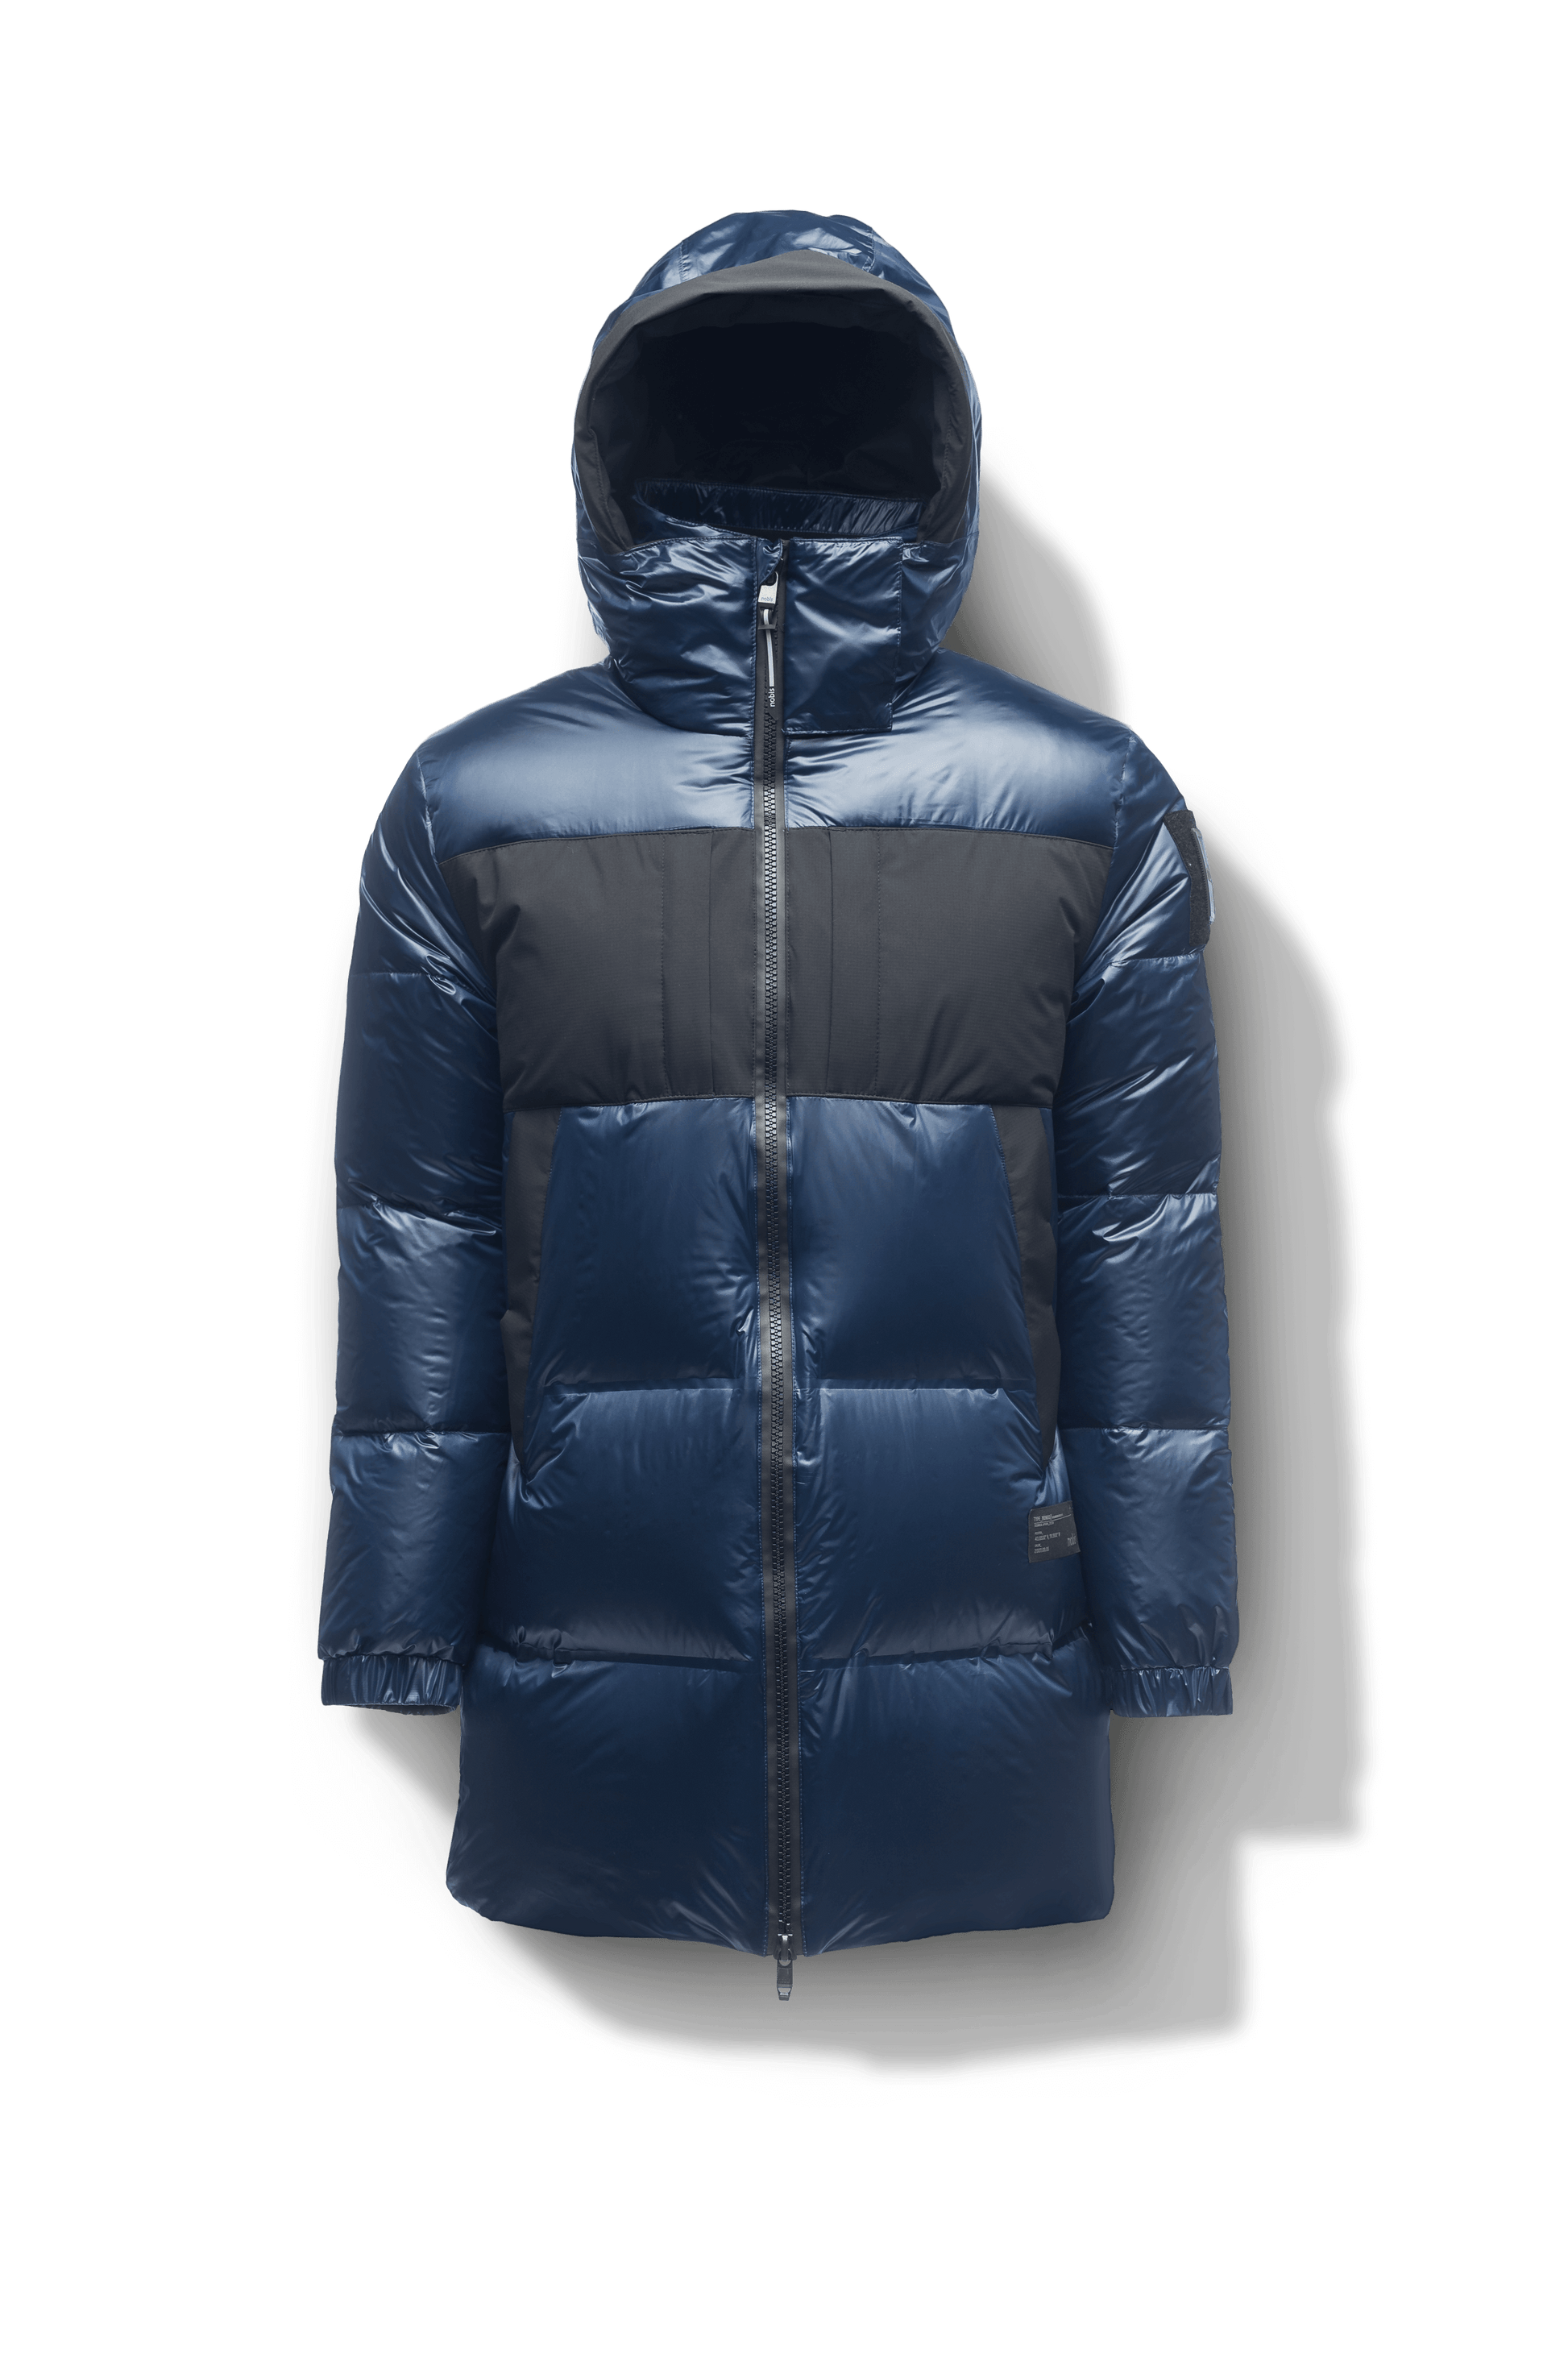 Neelix Men's Long Puffer Jacket in thigh length, premium cire technical nylon taffeta and stretch ripstop fabrication, Premium Canadian origin White Duck Down insulation, non-removable down-filled hood, two-way centre-front zipper, pit zipper vents, hidden chest zipper pockets, fleece-lined magnetic closure waist pockets, in Marine